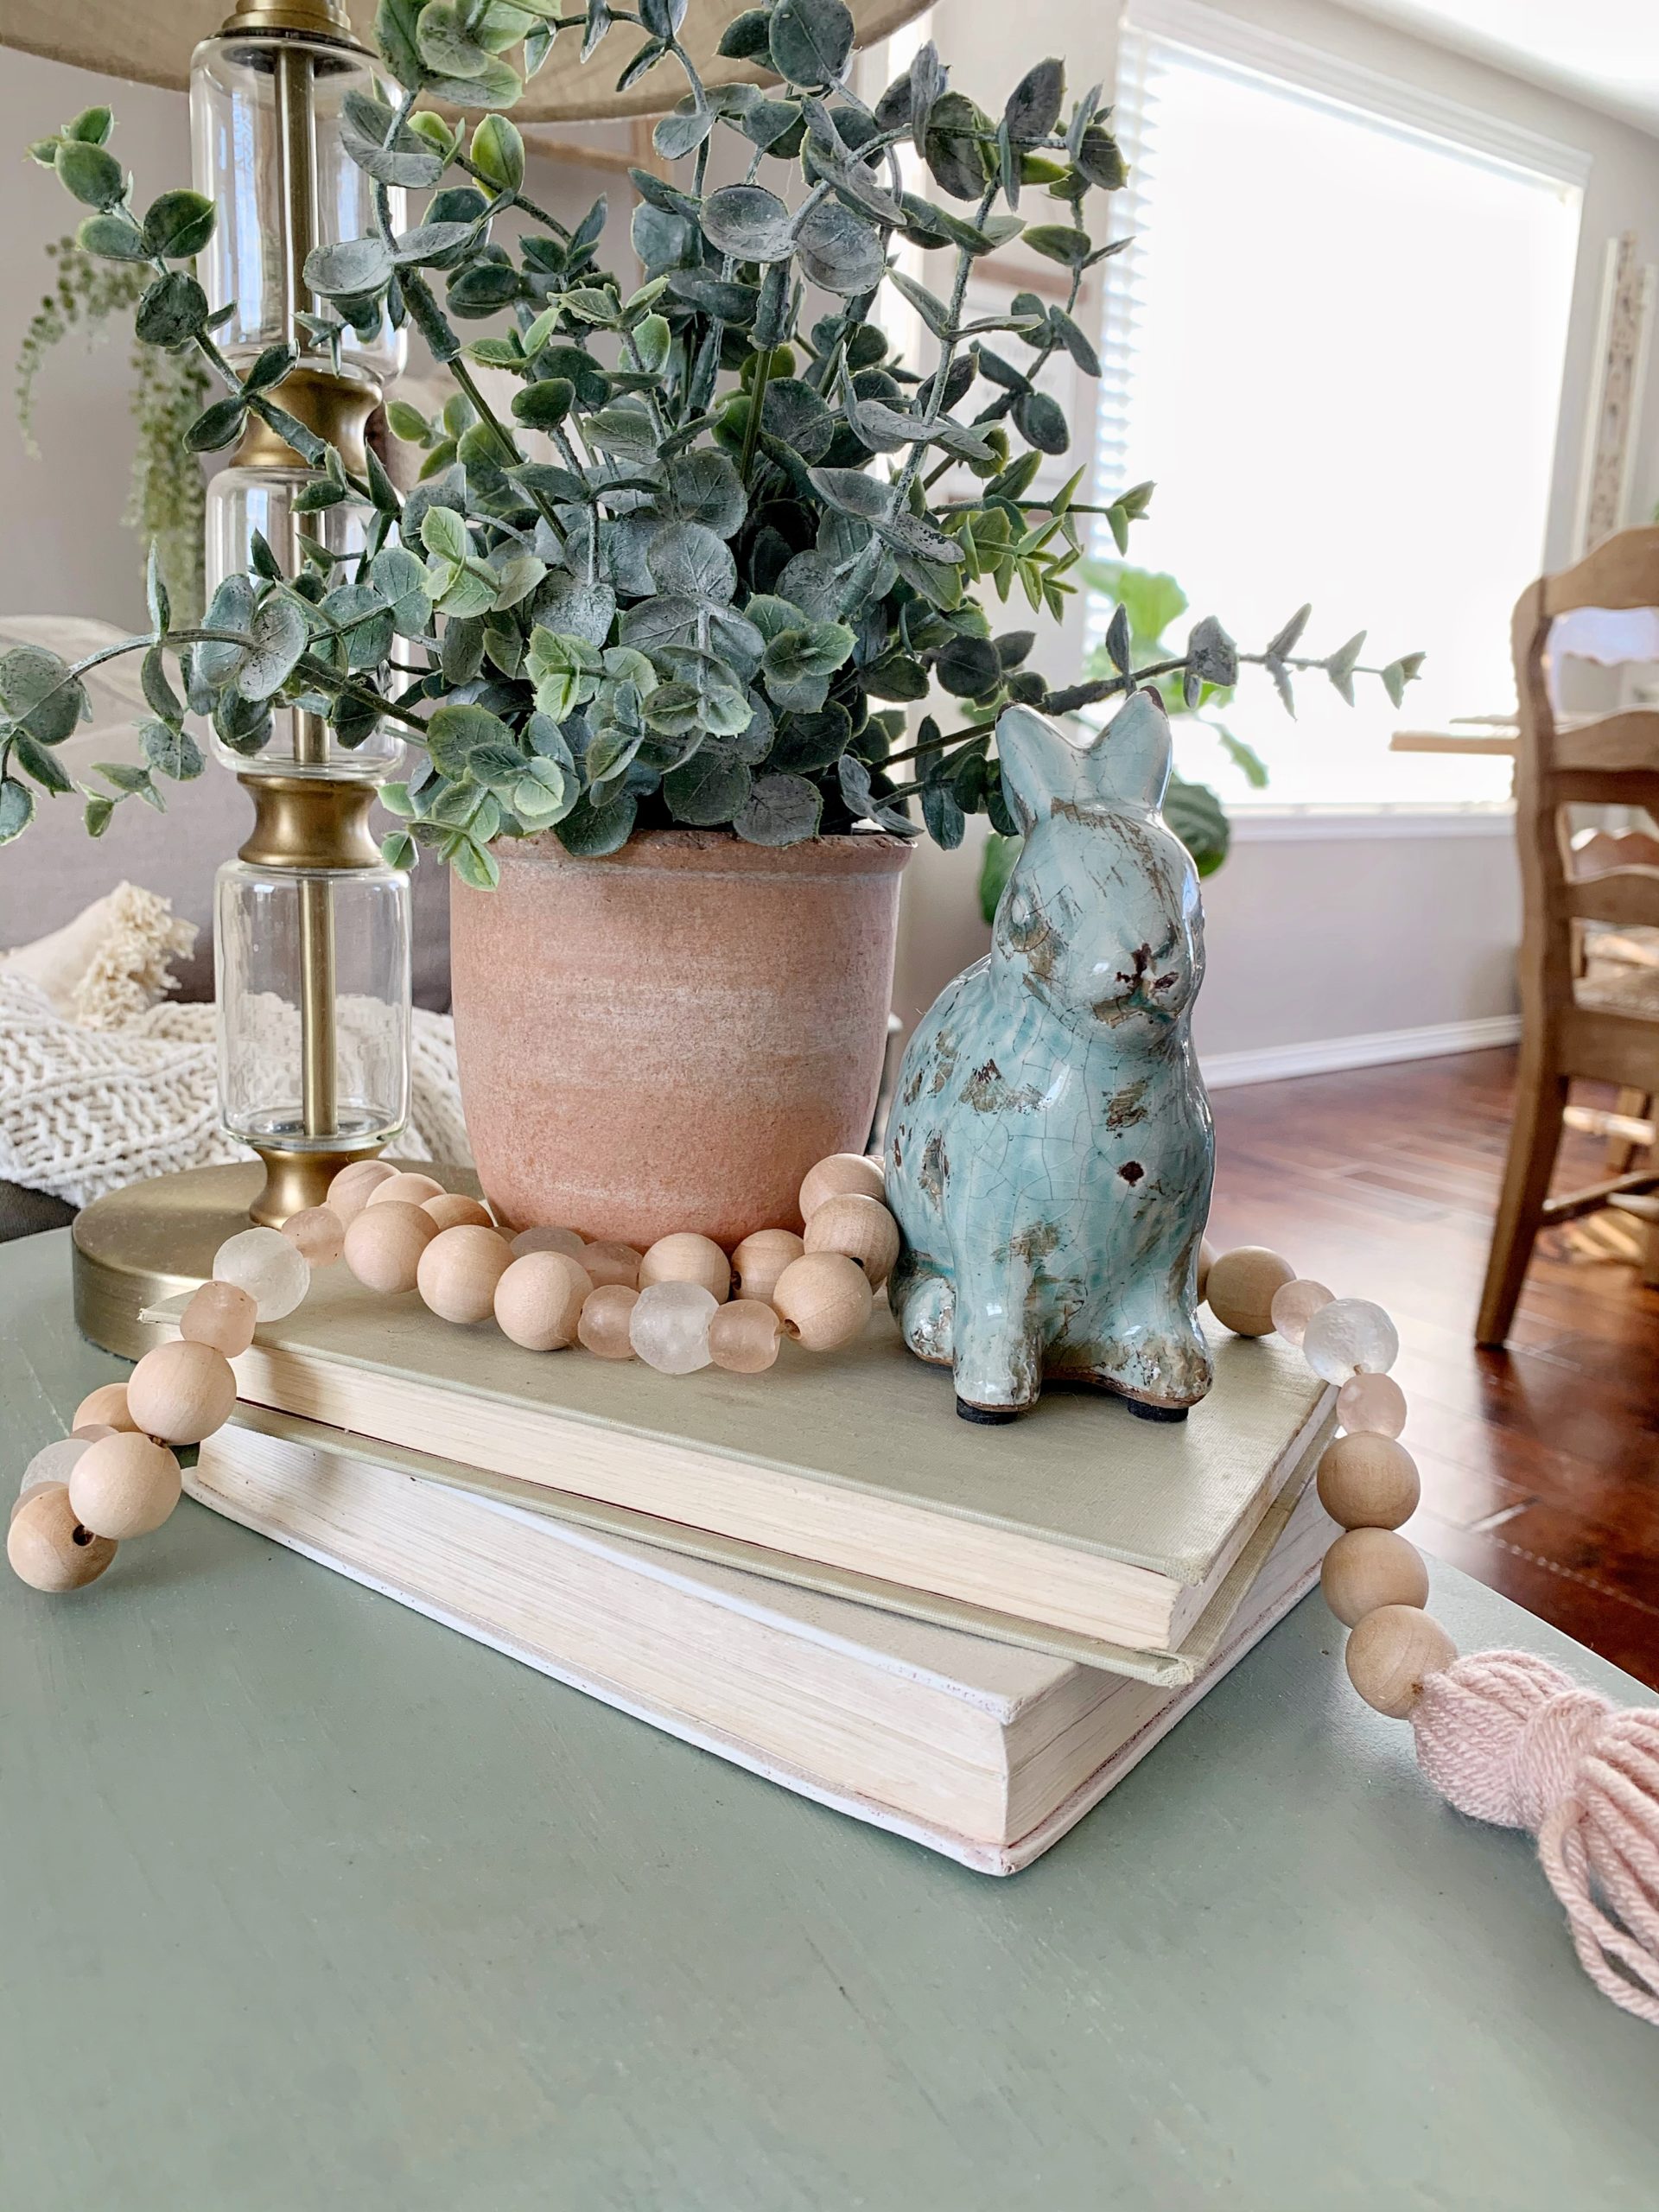 Styling decor beads in your home. Decor bead strands add texture and beauty to your home